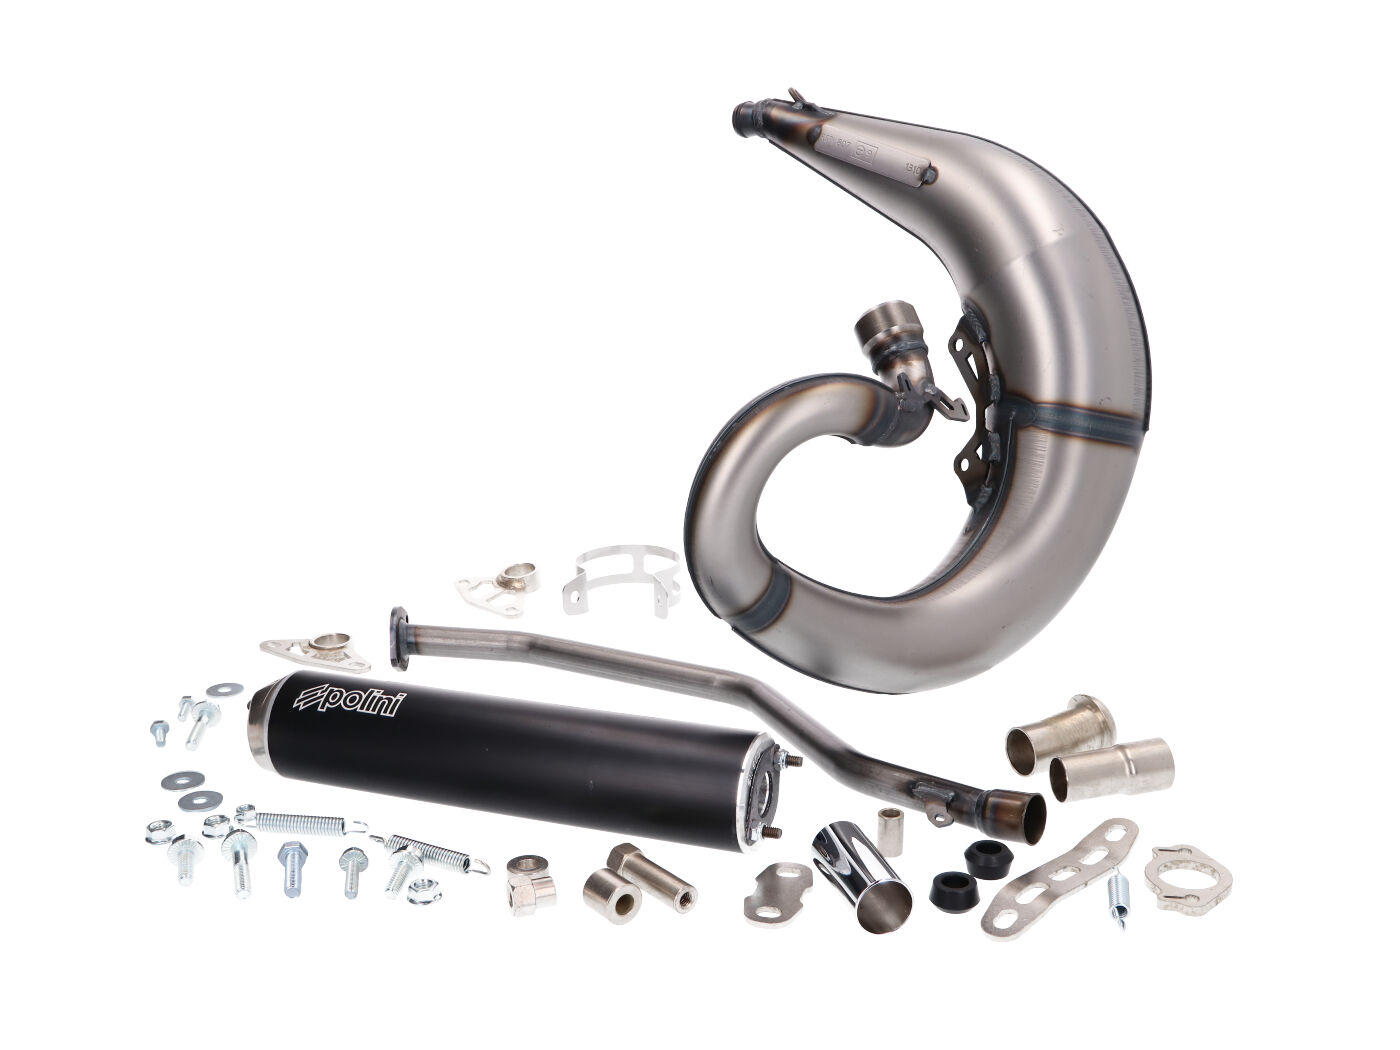 Polini for race muffler low for Yamaha DT50SM Minarelli AM6 2T